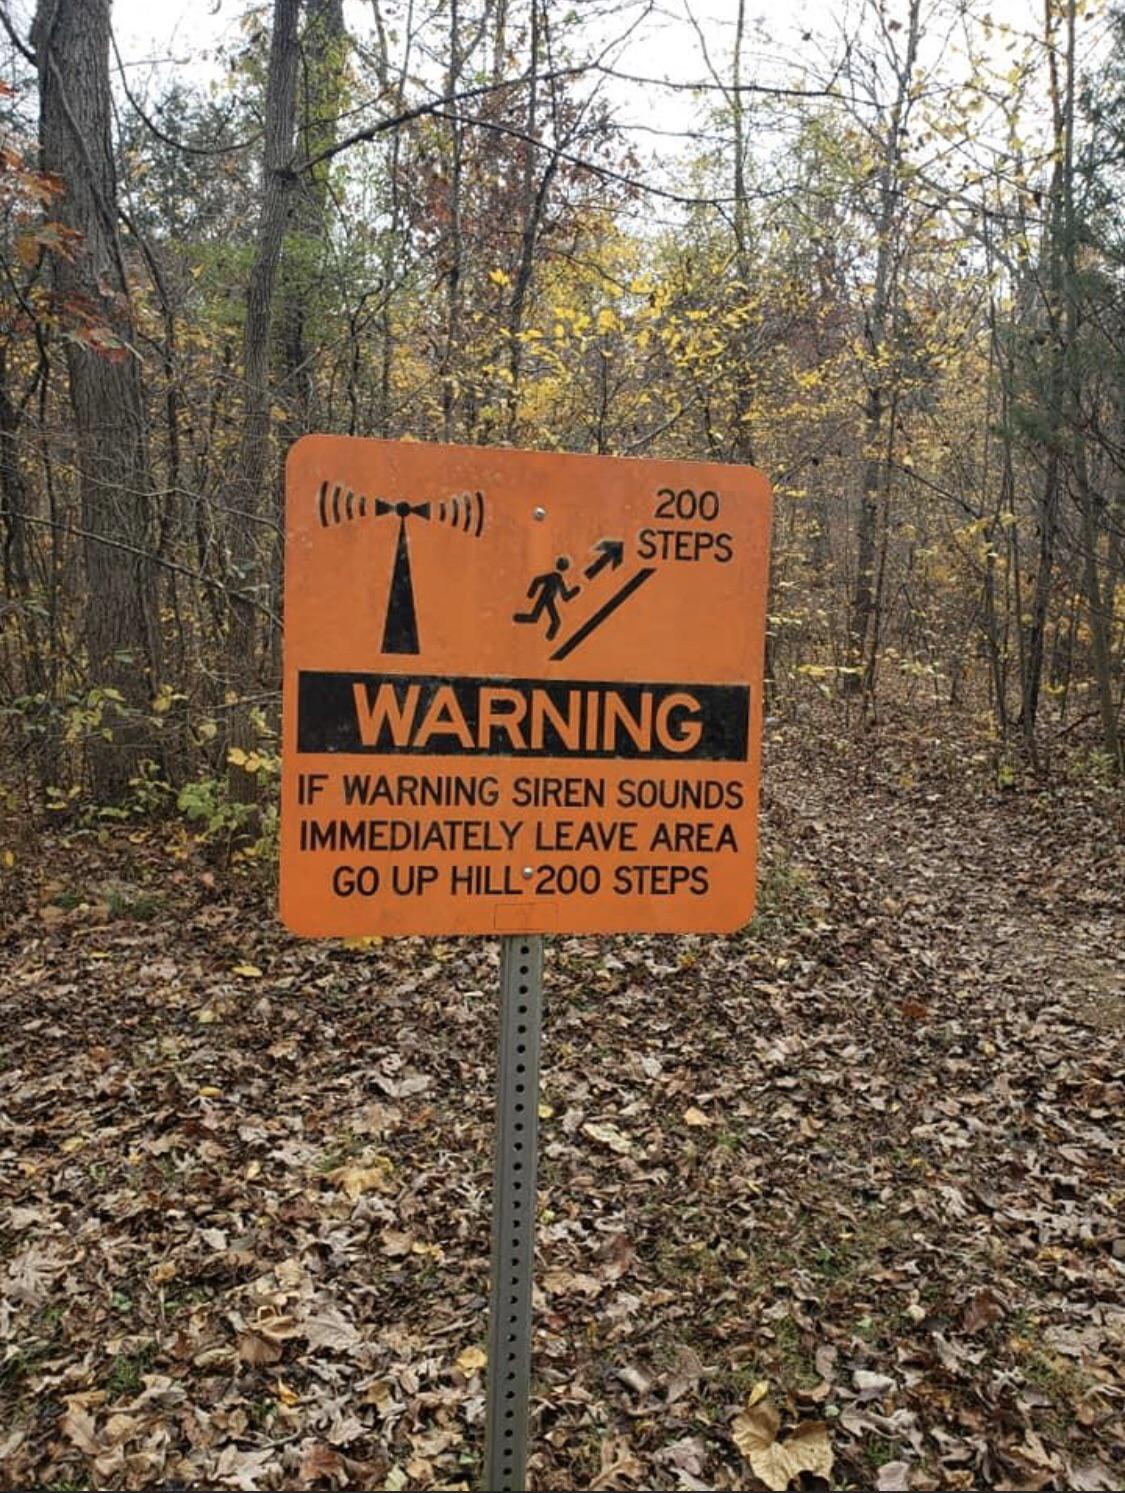 Immediately leave. If Warning Siren Sounds immediately leave area. If Warning Siren Sounds immediately leave area go up Hill 200 steps. Warning Buzzer Space. Scared sign.